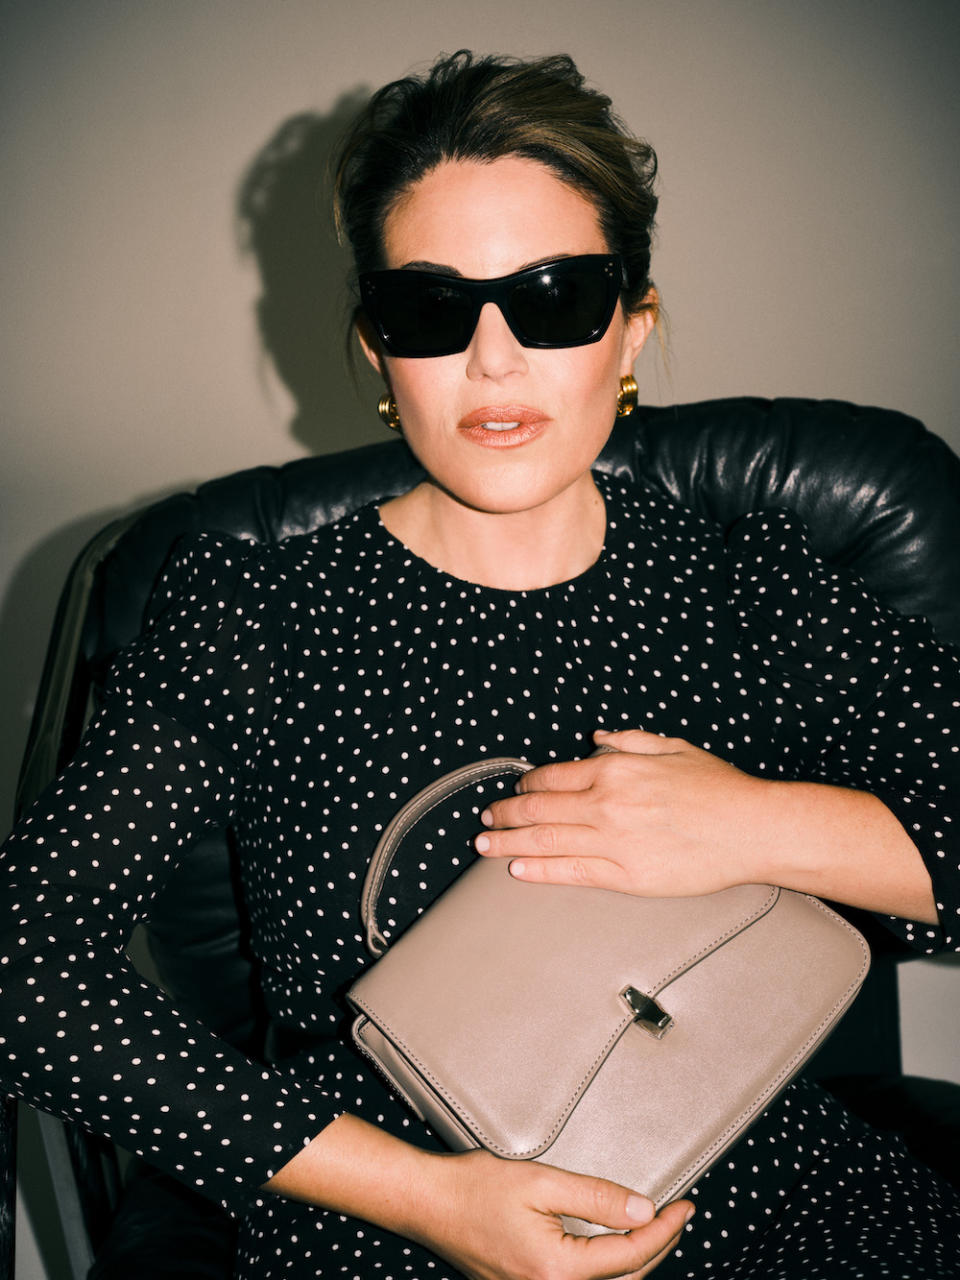 Monica Lewinsky appears in a press campaign for Reformation with a dotted dress and leather bag